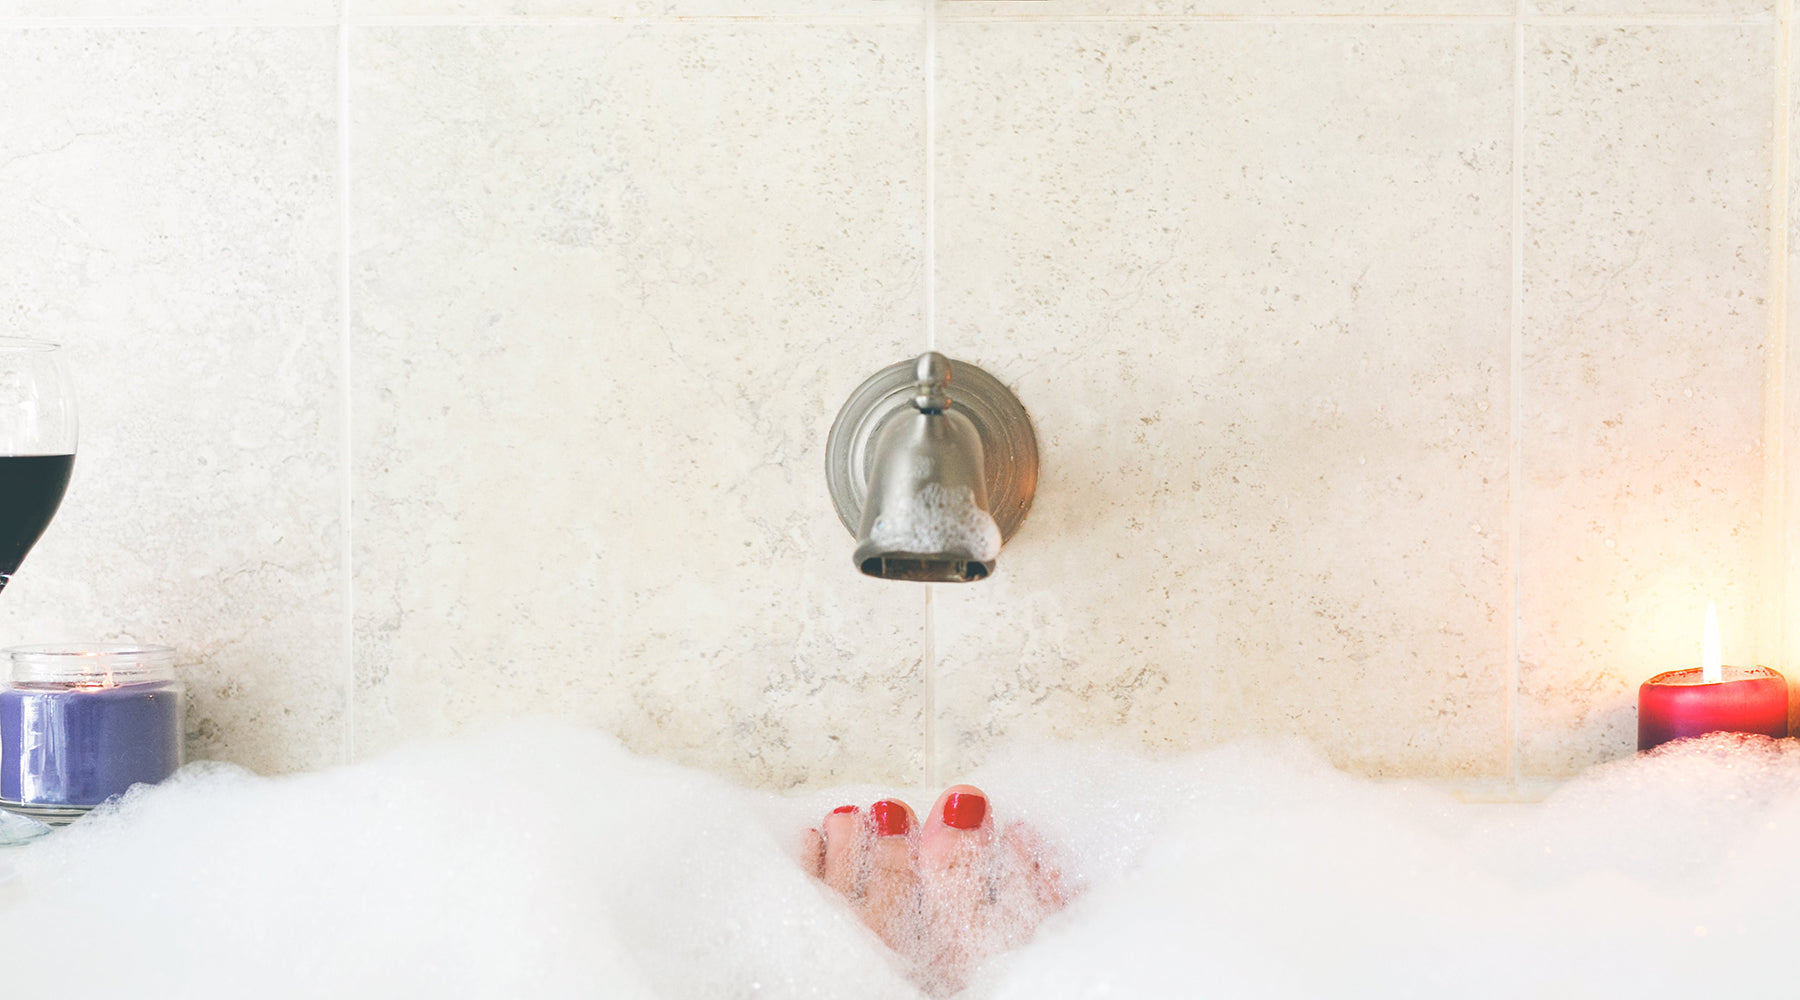 Red-painted toe sticking out of bubble bath underneath faucet | Nikki Darling Australia